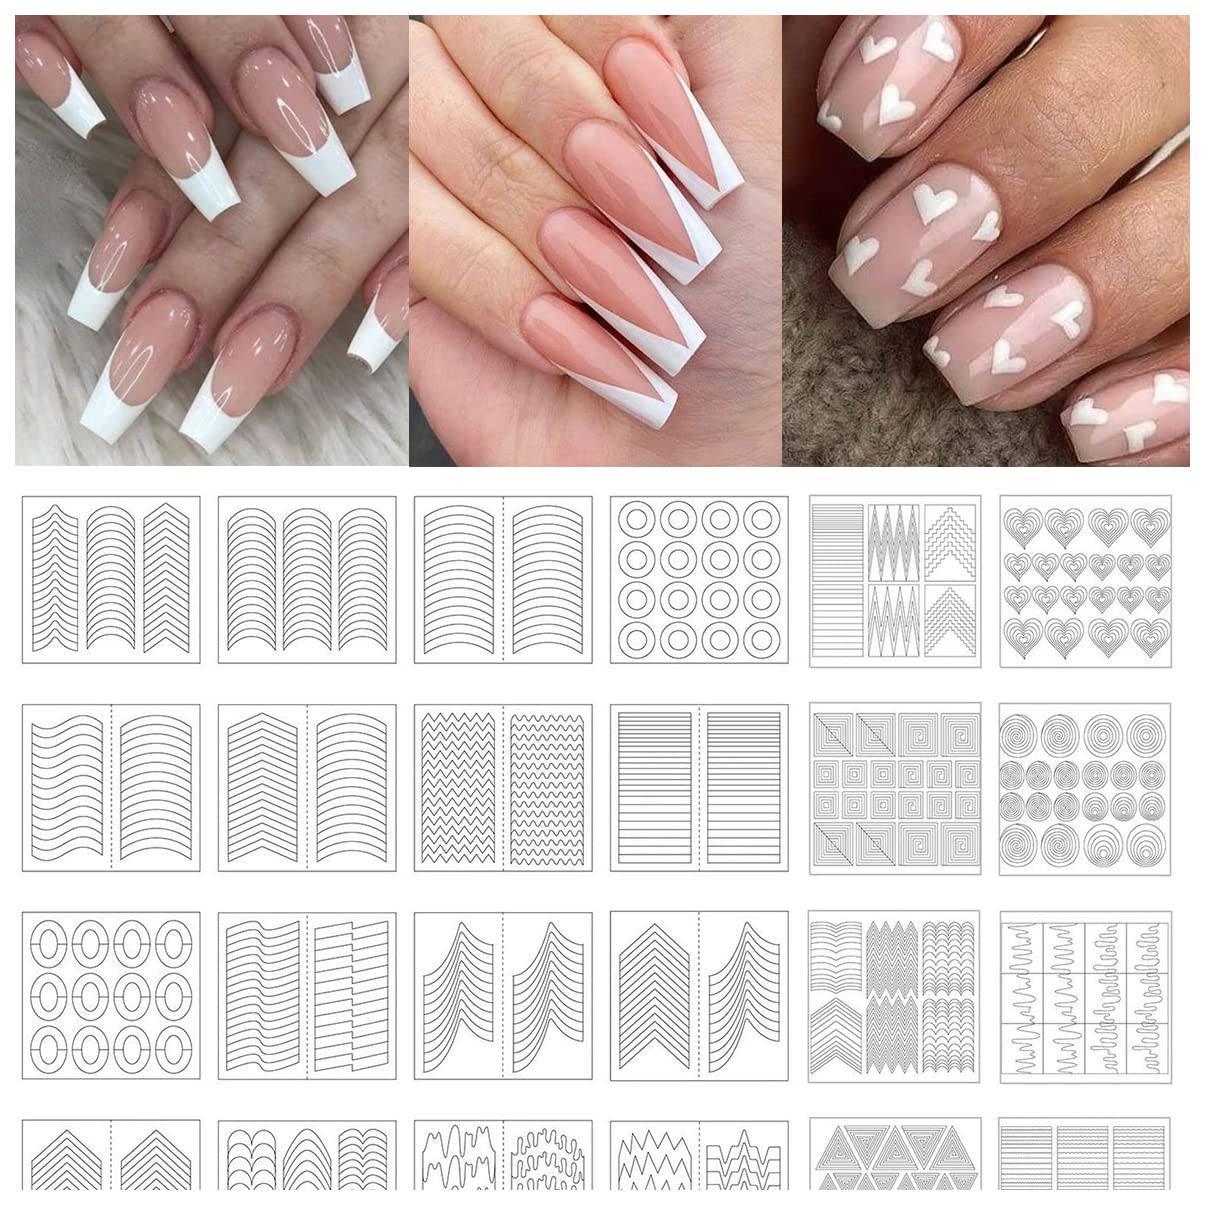 TaiLaiMei + 60 Piece French Manicure Nail Stickers